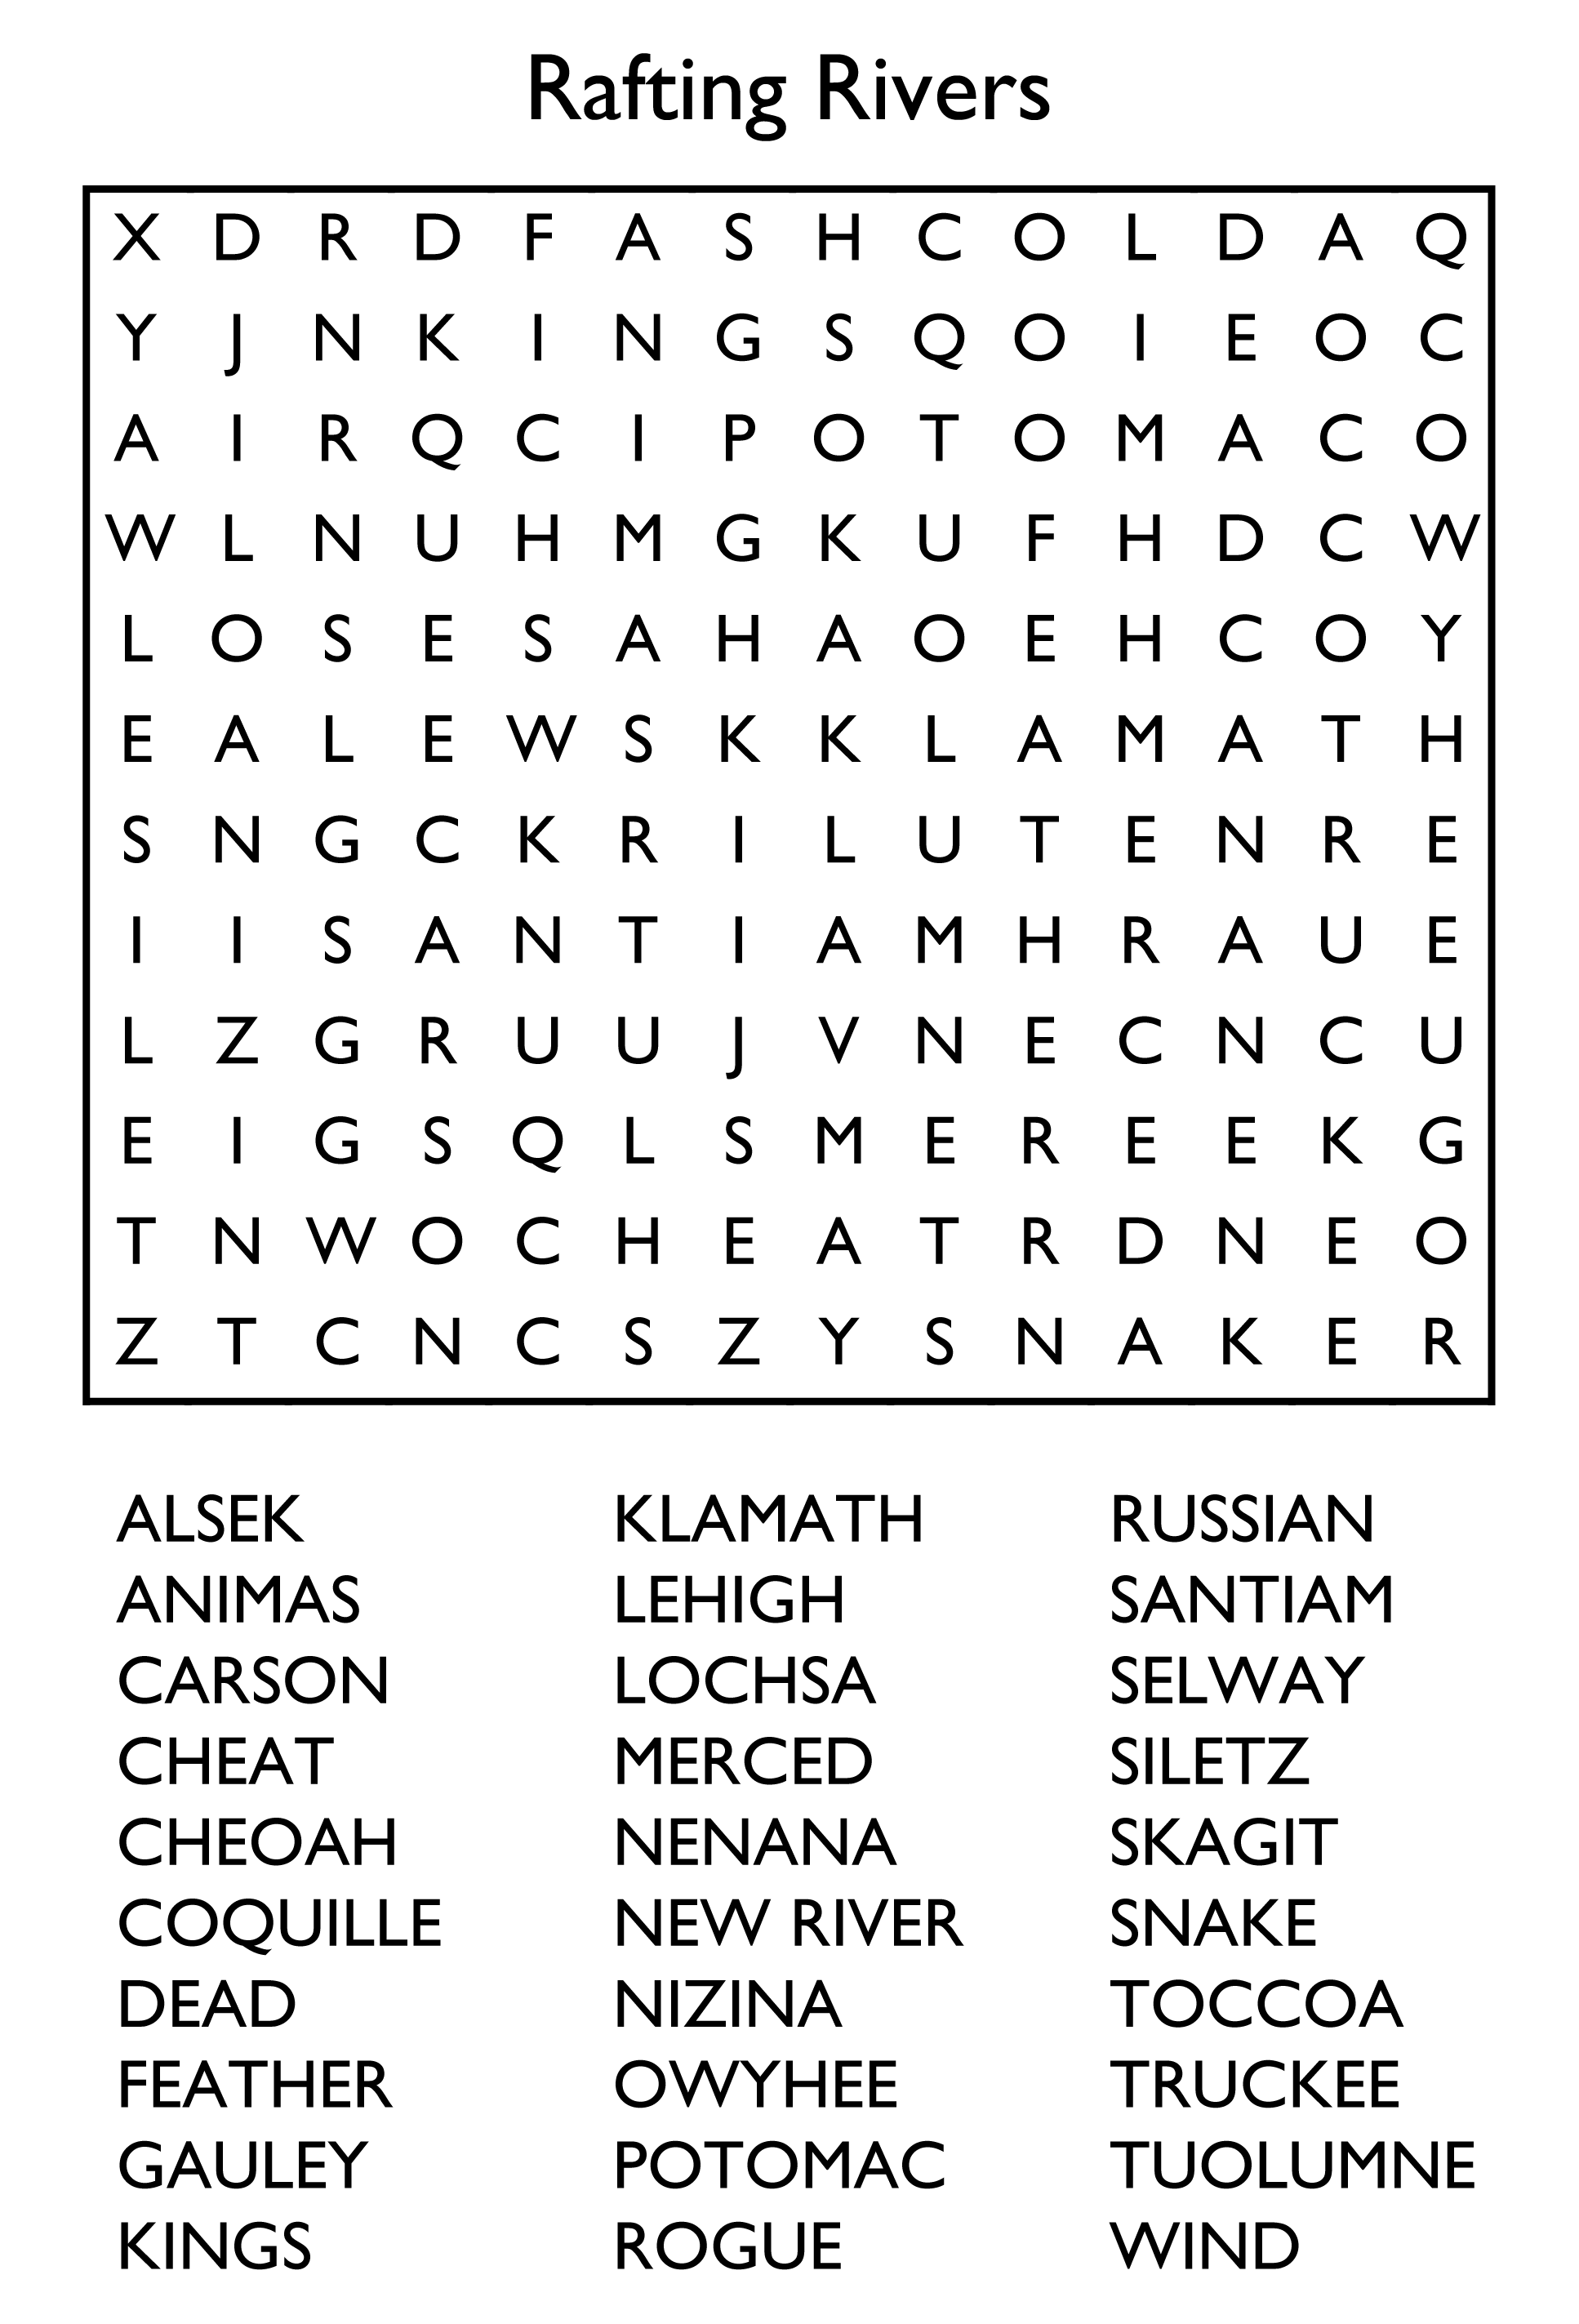 large print word searches for senior citizens